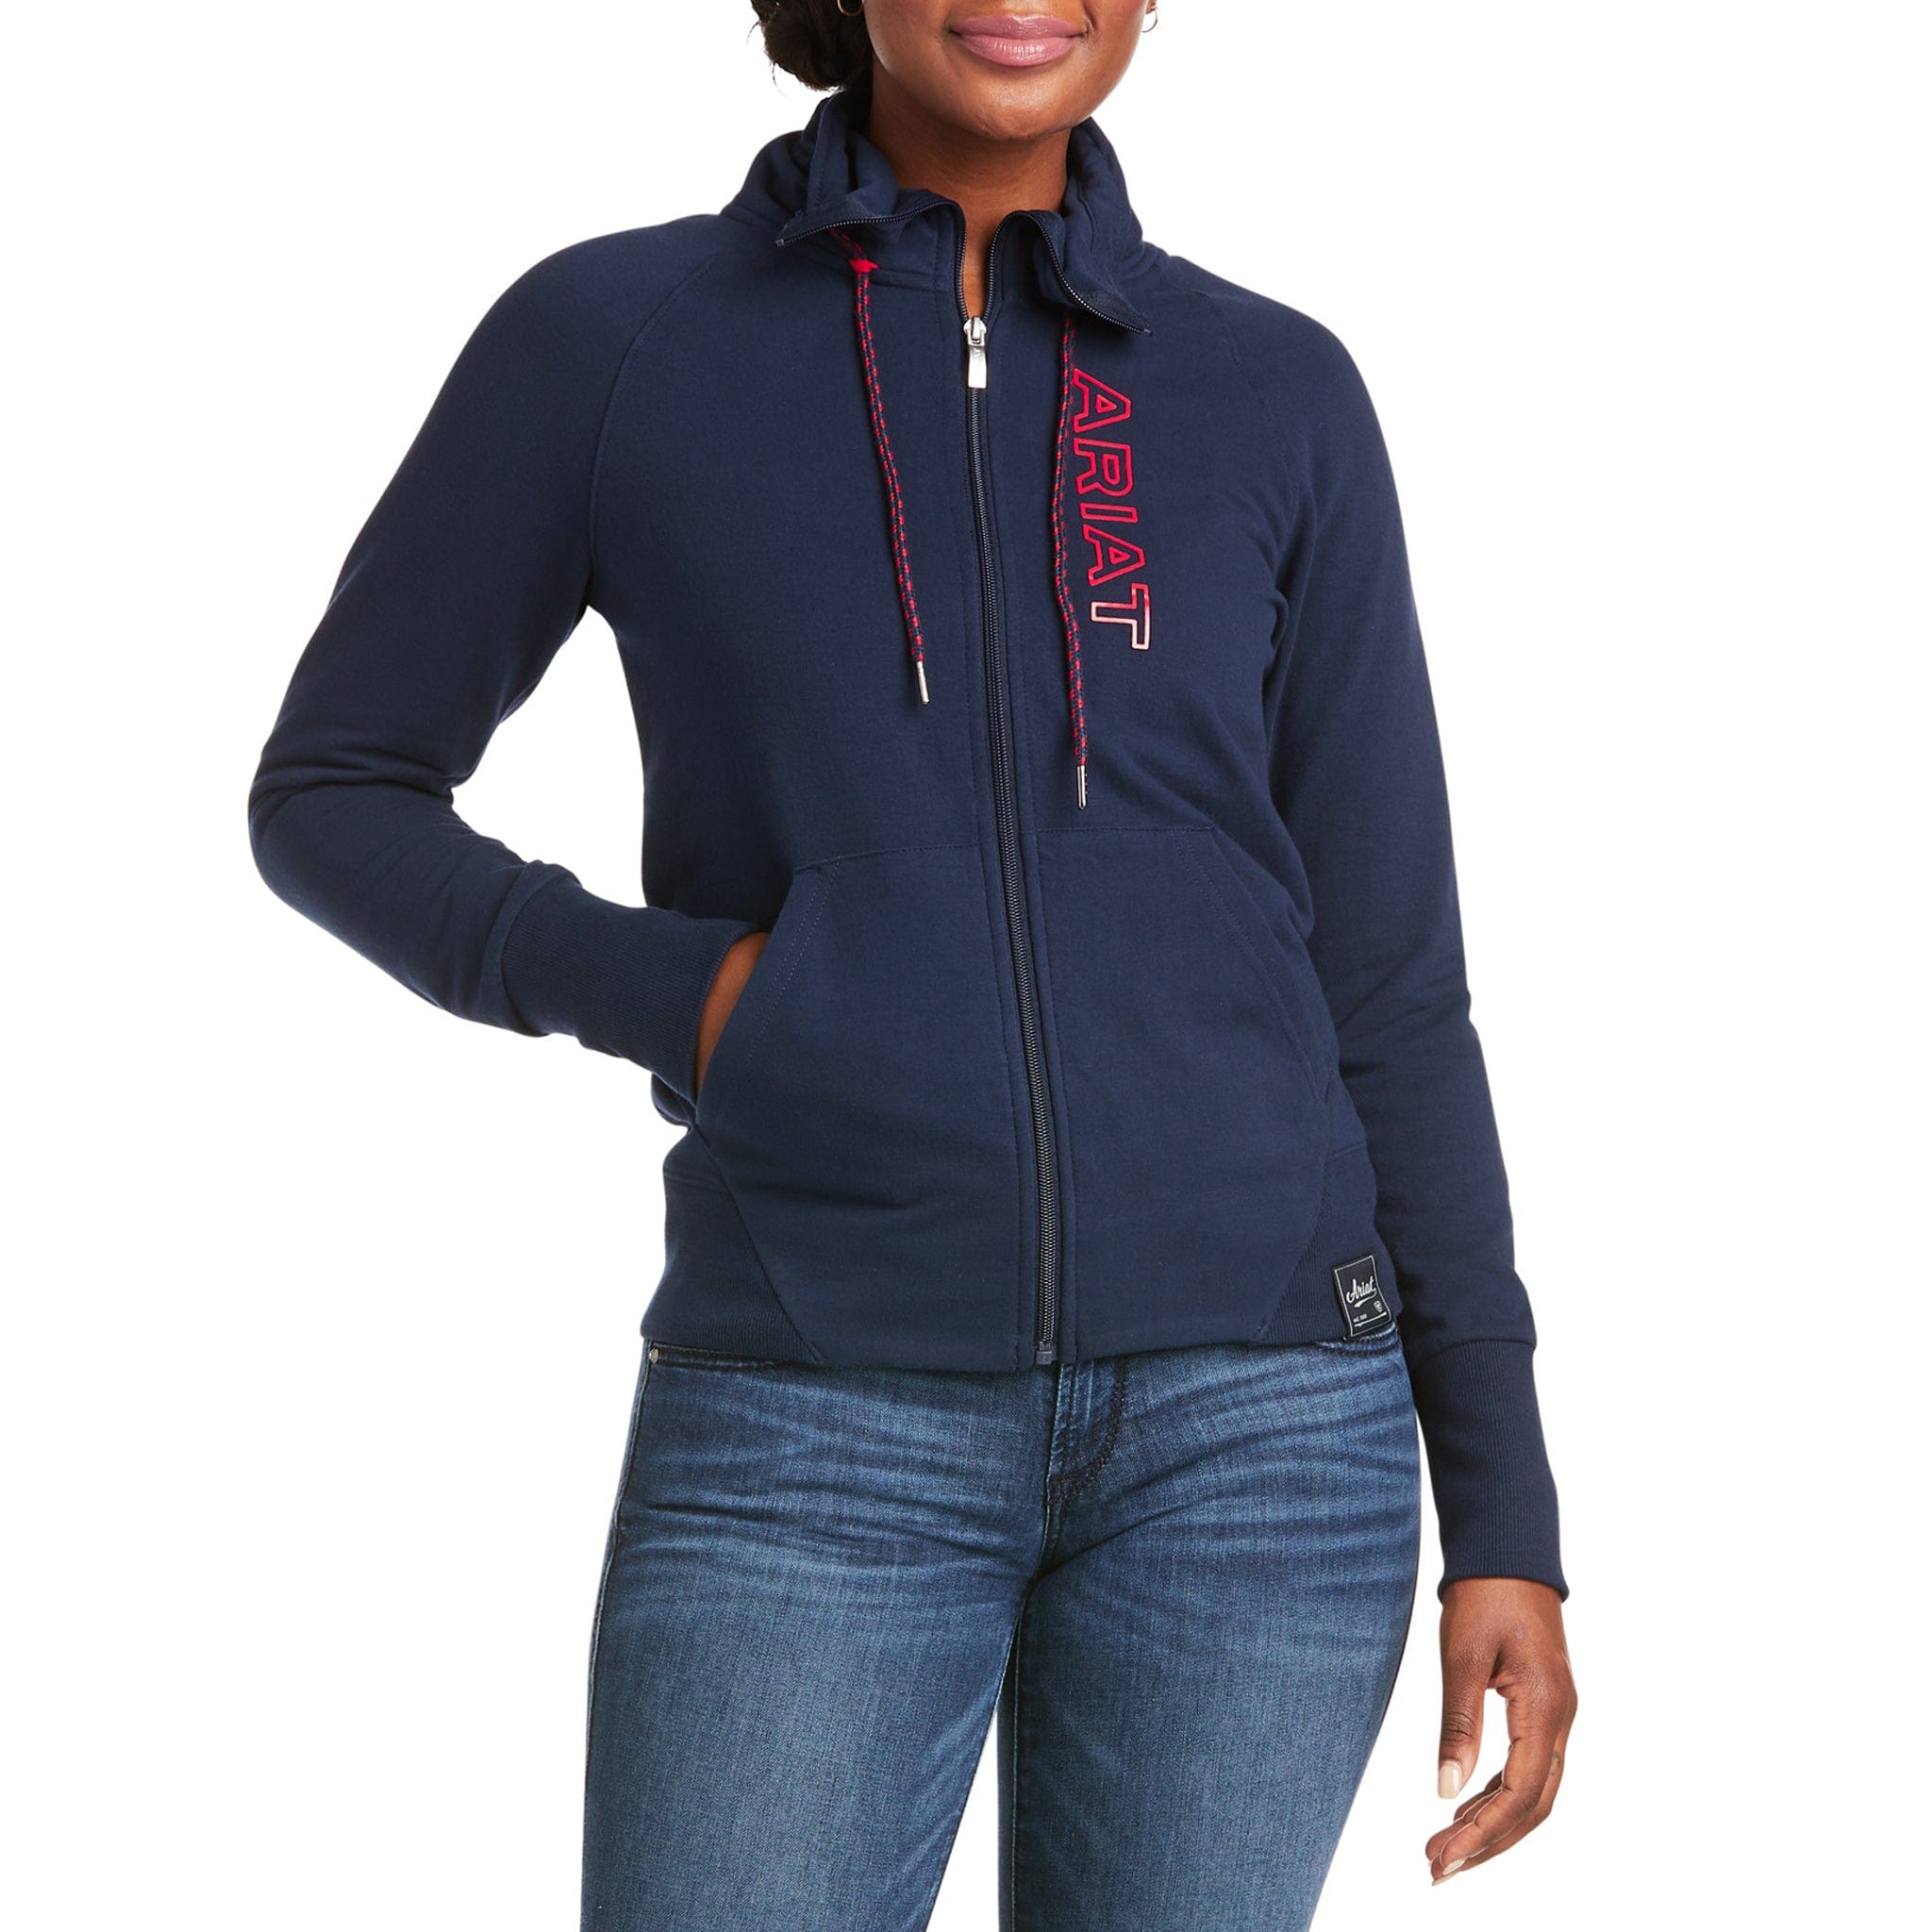 Ariat Team Logo Full Zip Sweatshirt 10037512 Navy and Red On Model Front View